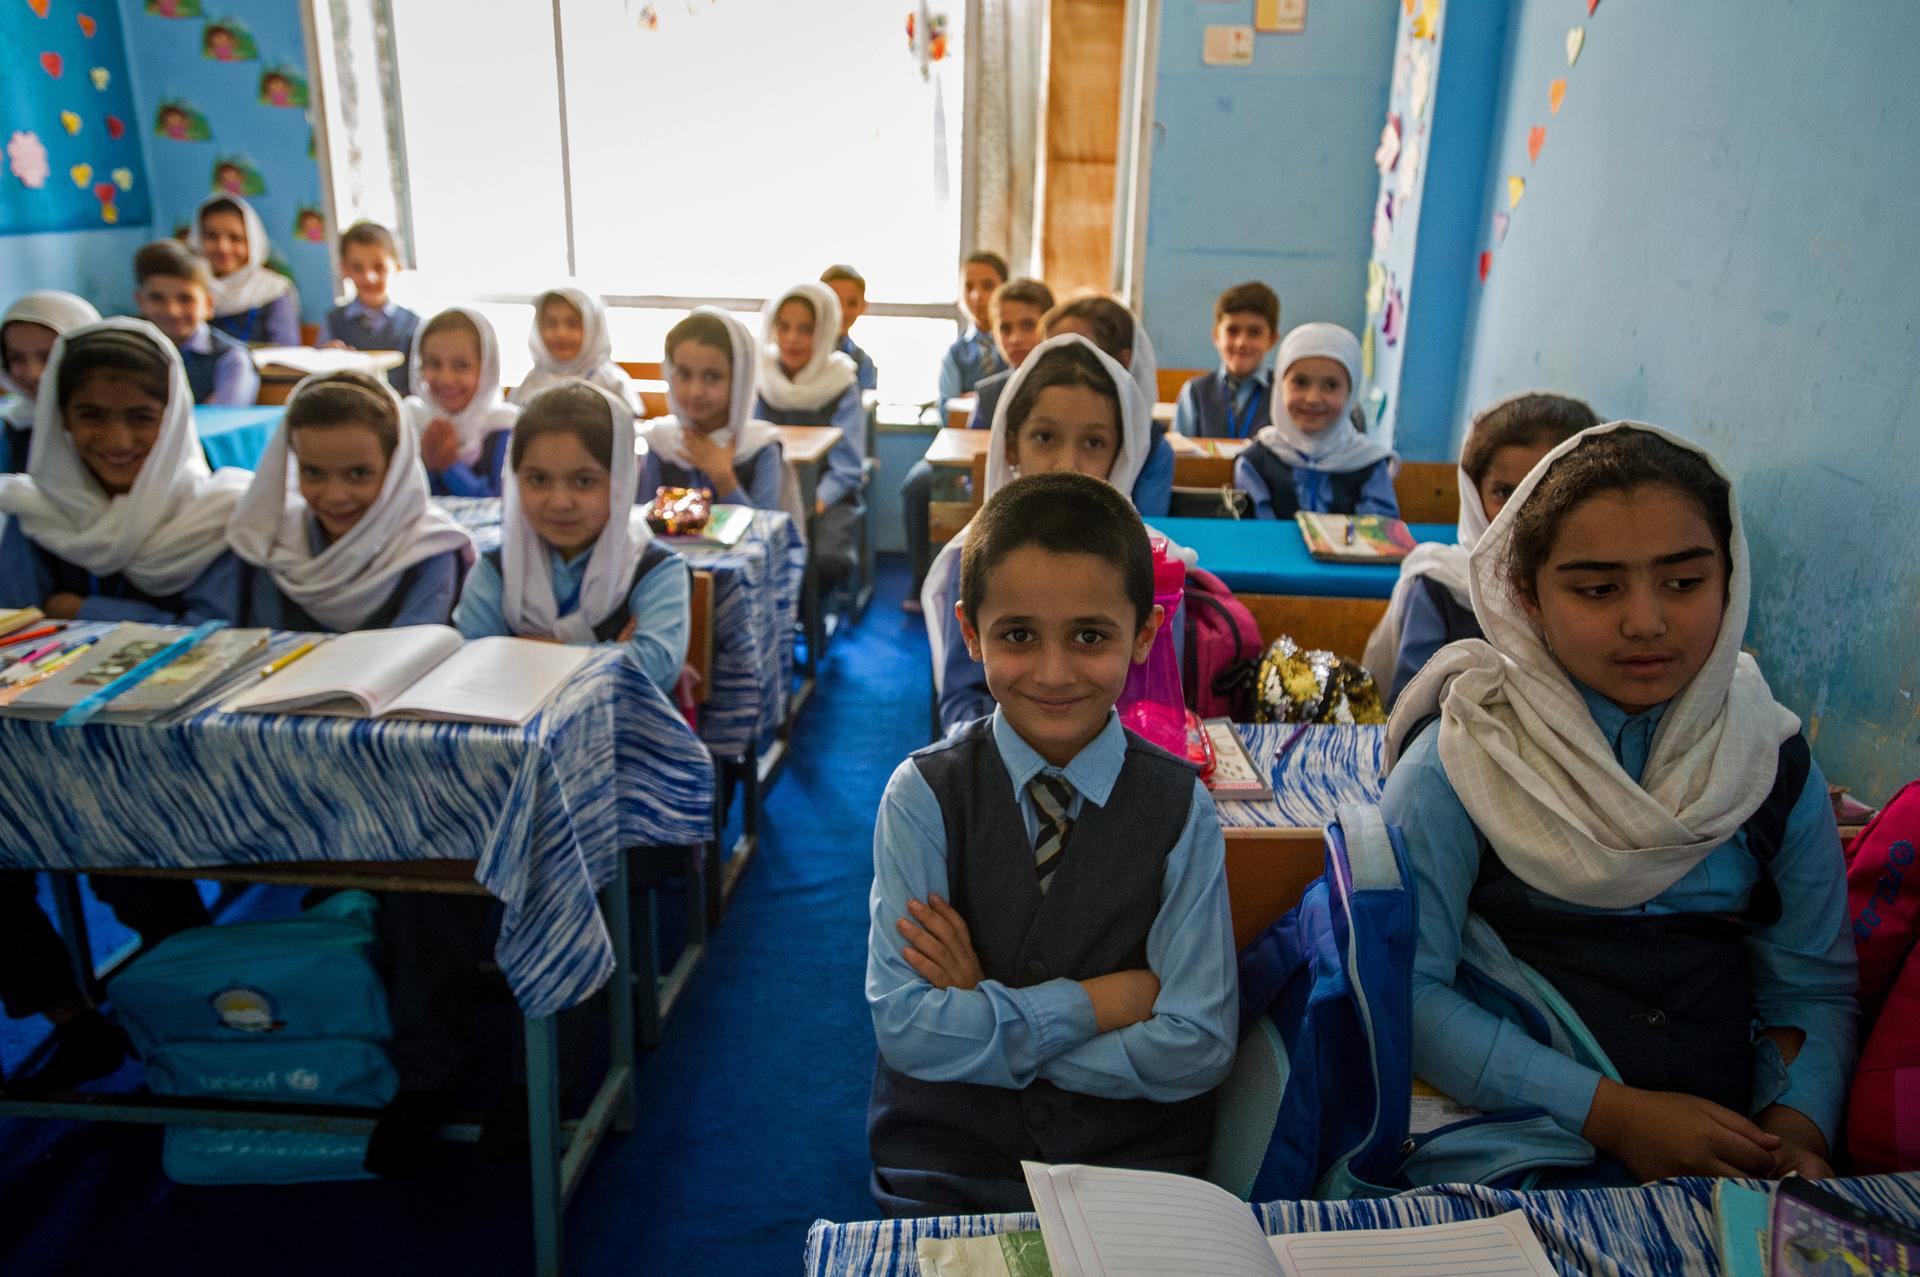 A group of children in a classroom smile for the camera while sitting at their desks.